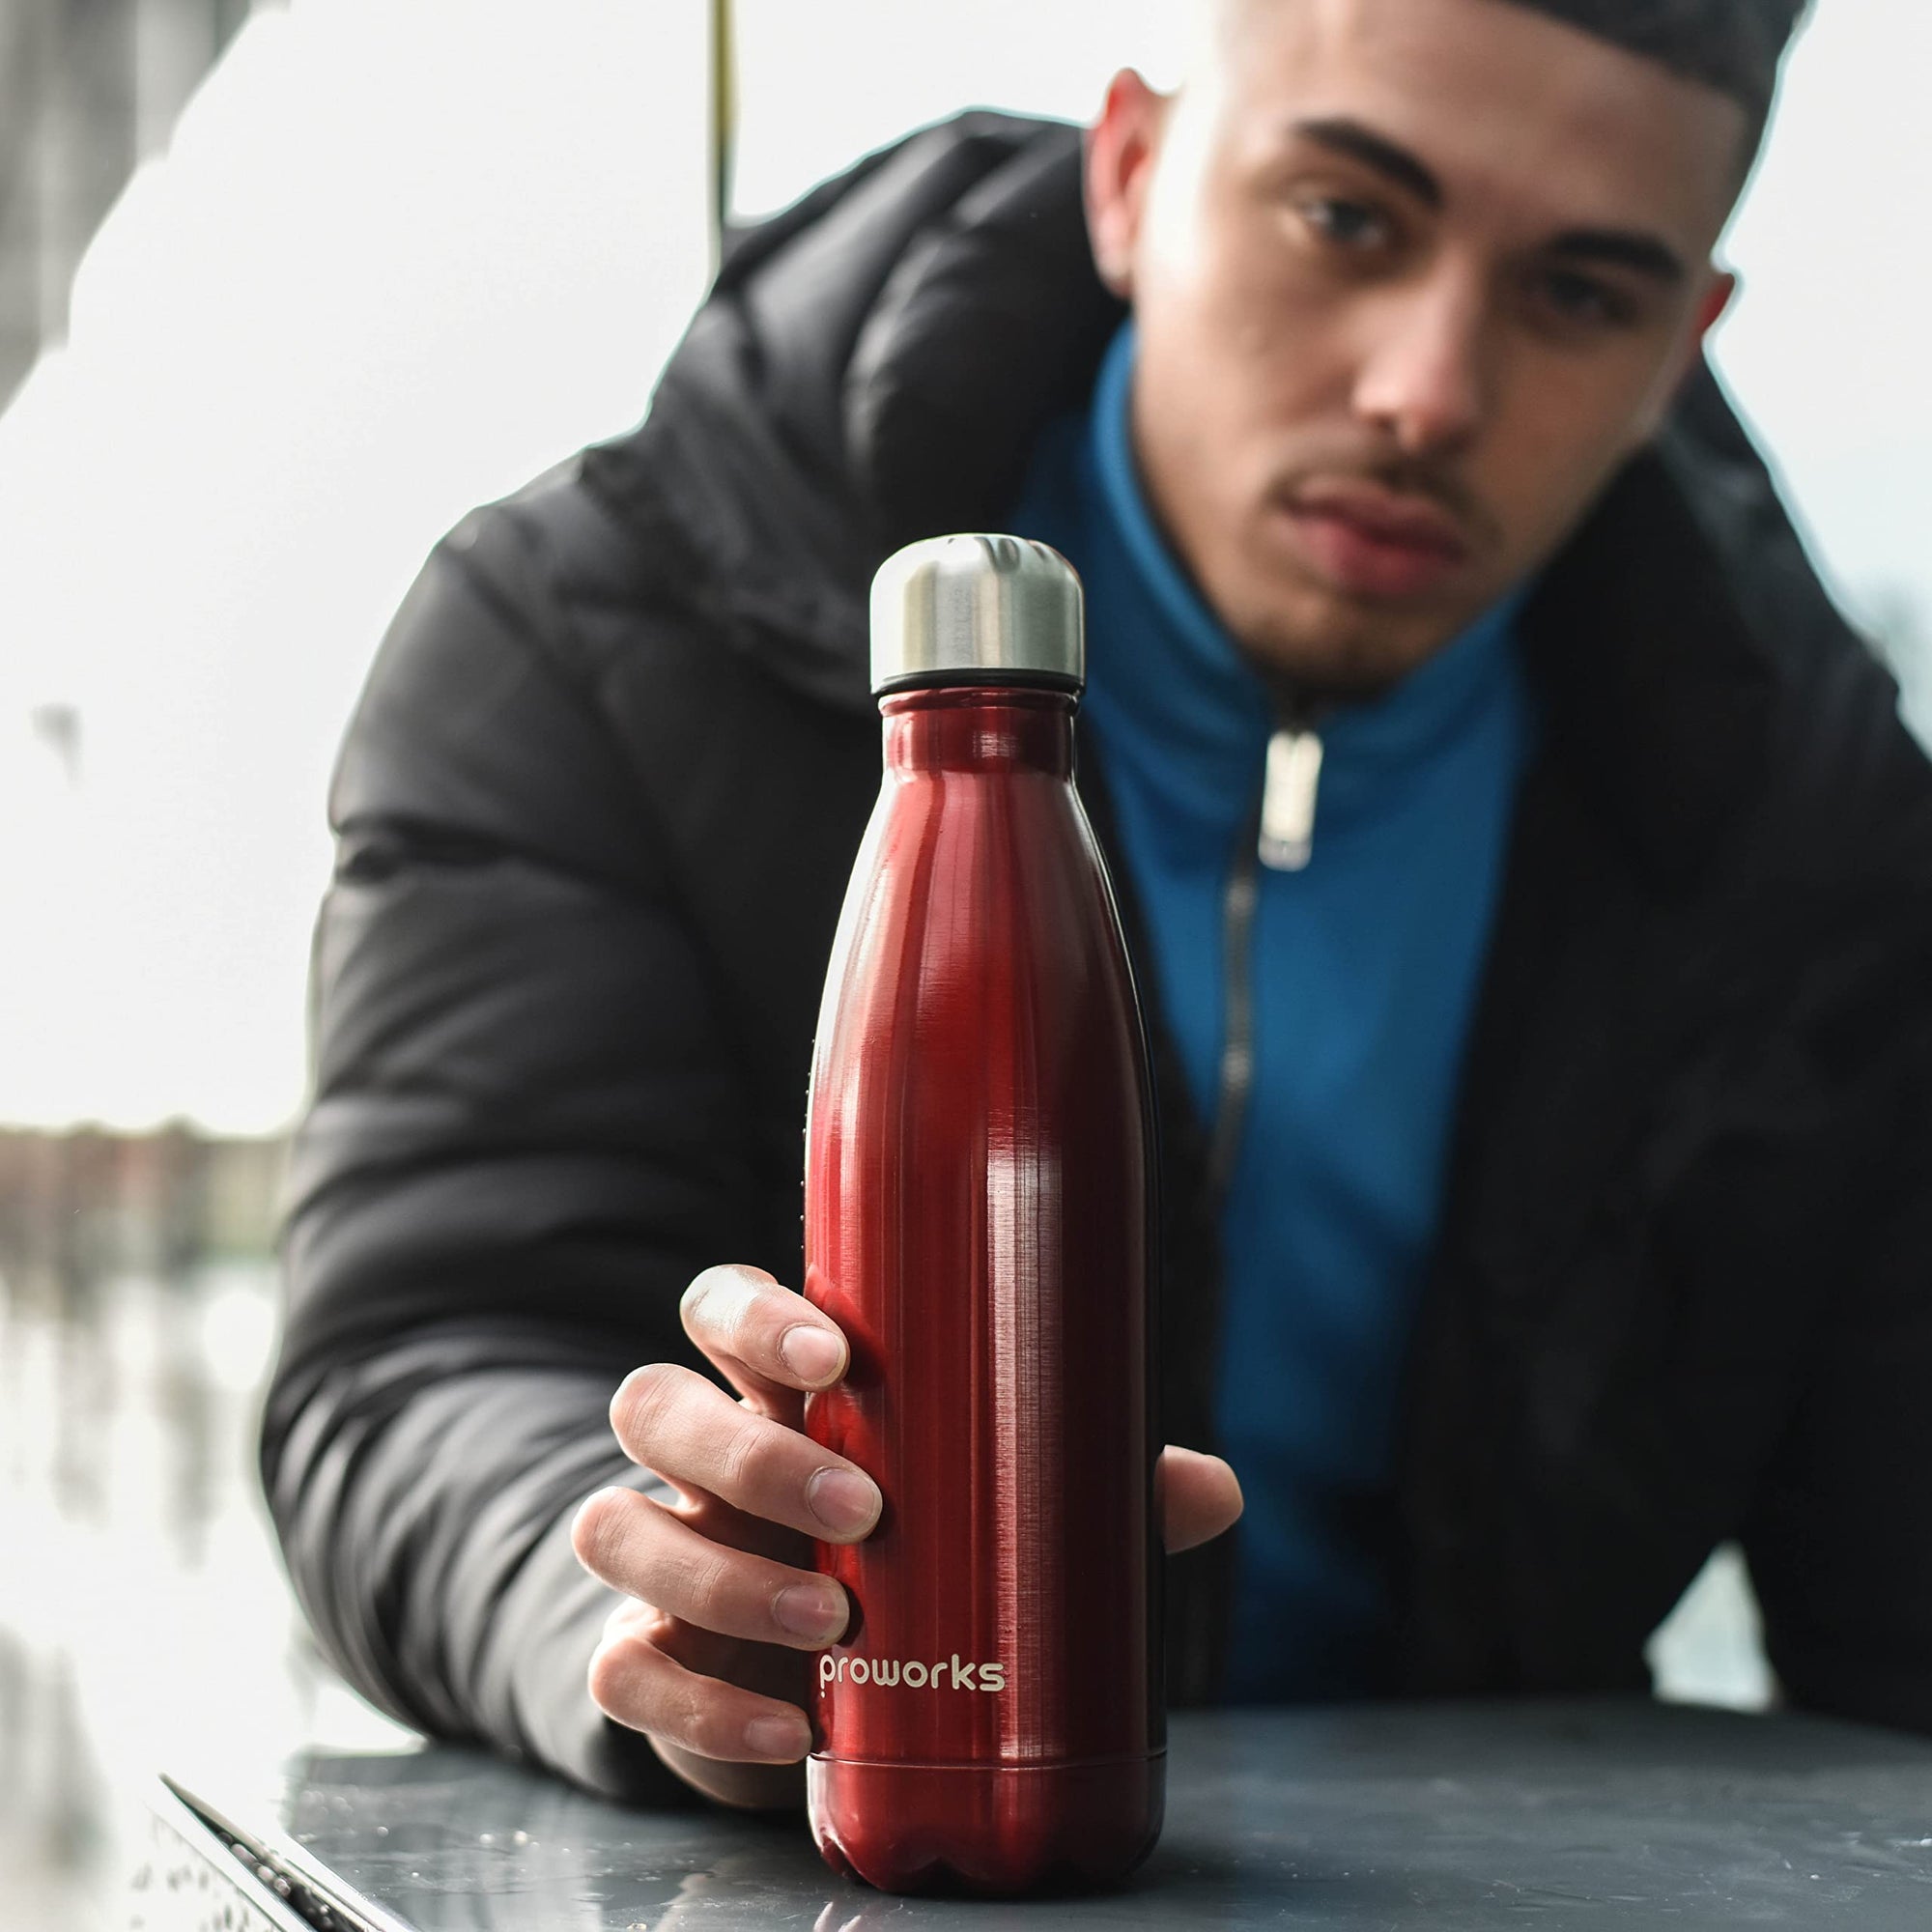 Choosing Your Best Gym Water Bottle - The Ultimate Guide